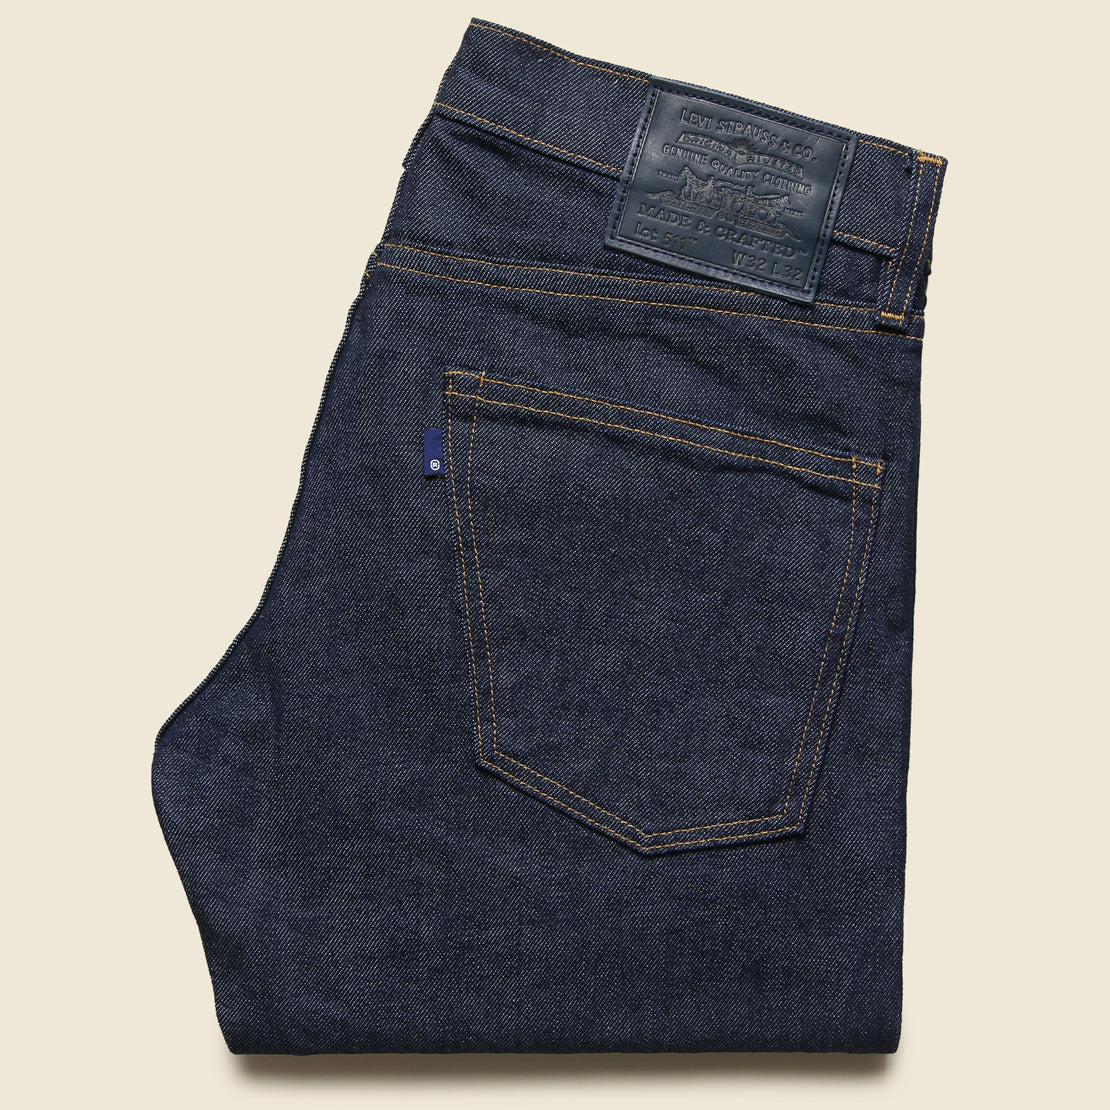 511 Slim Fit Jean - Resin Rinse - Levis Made & Crafted - STAG Provisions - Pants - Denim